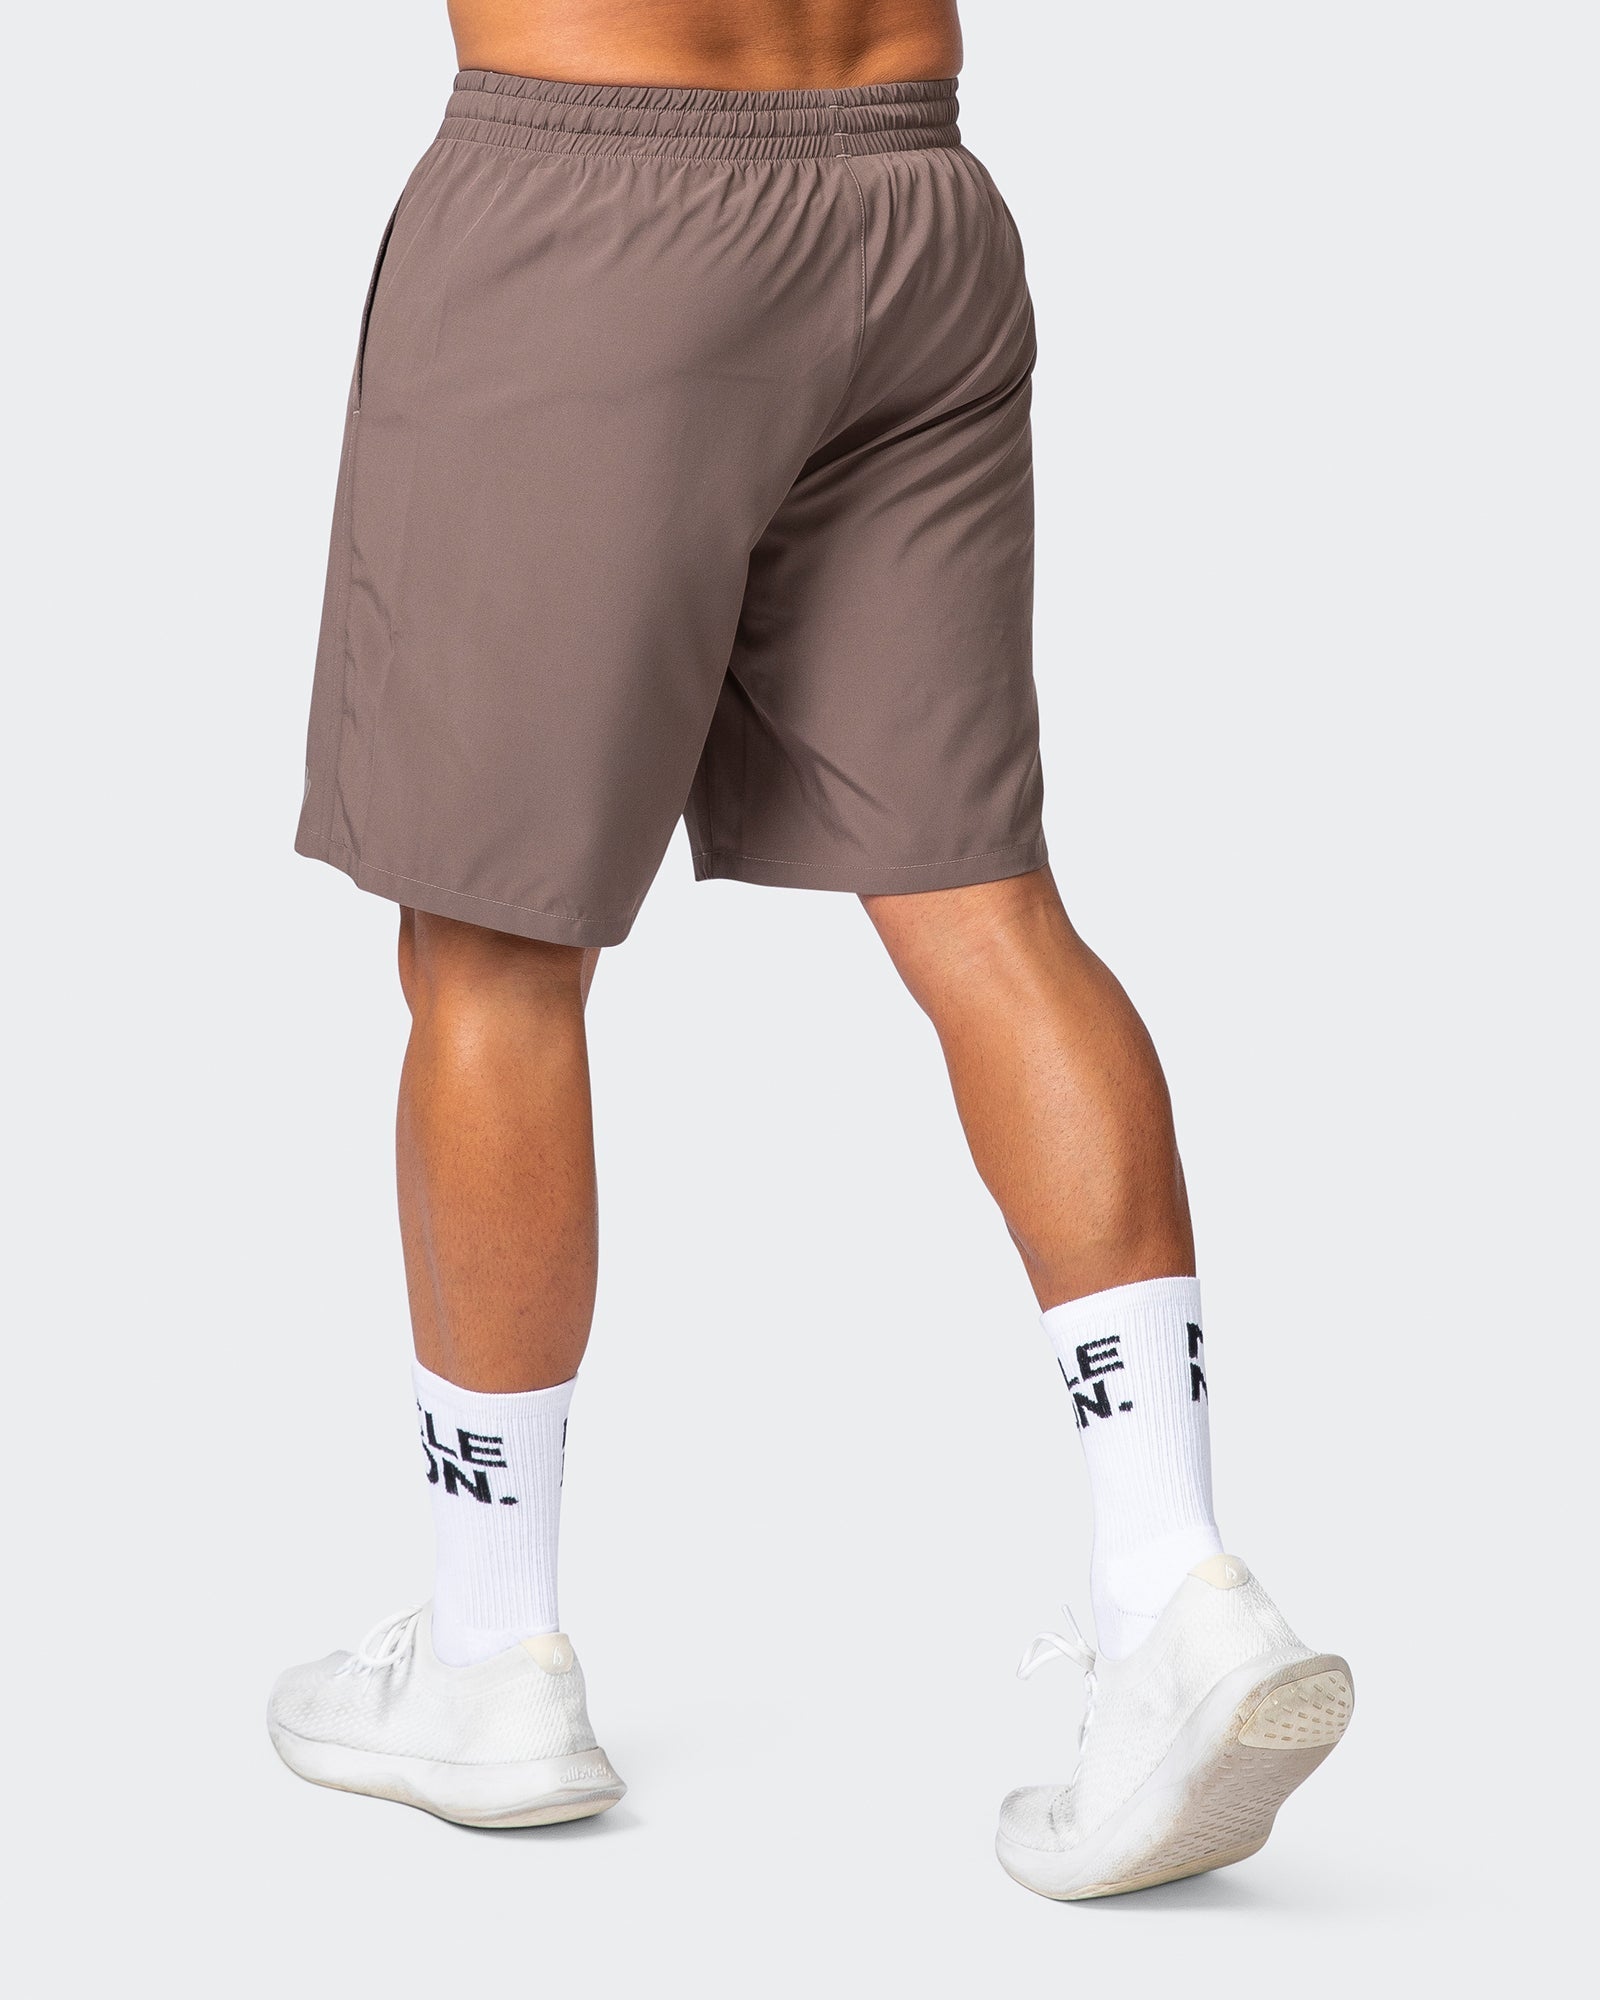 musclenation NEW HEIGHTS 7" SHORTS Dark Taupe